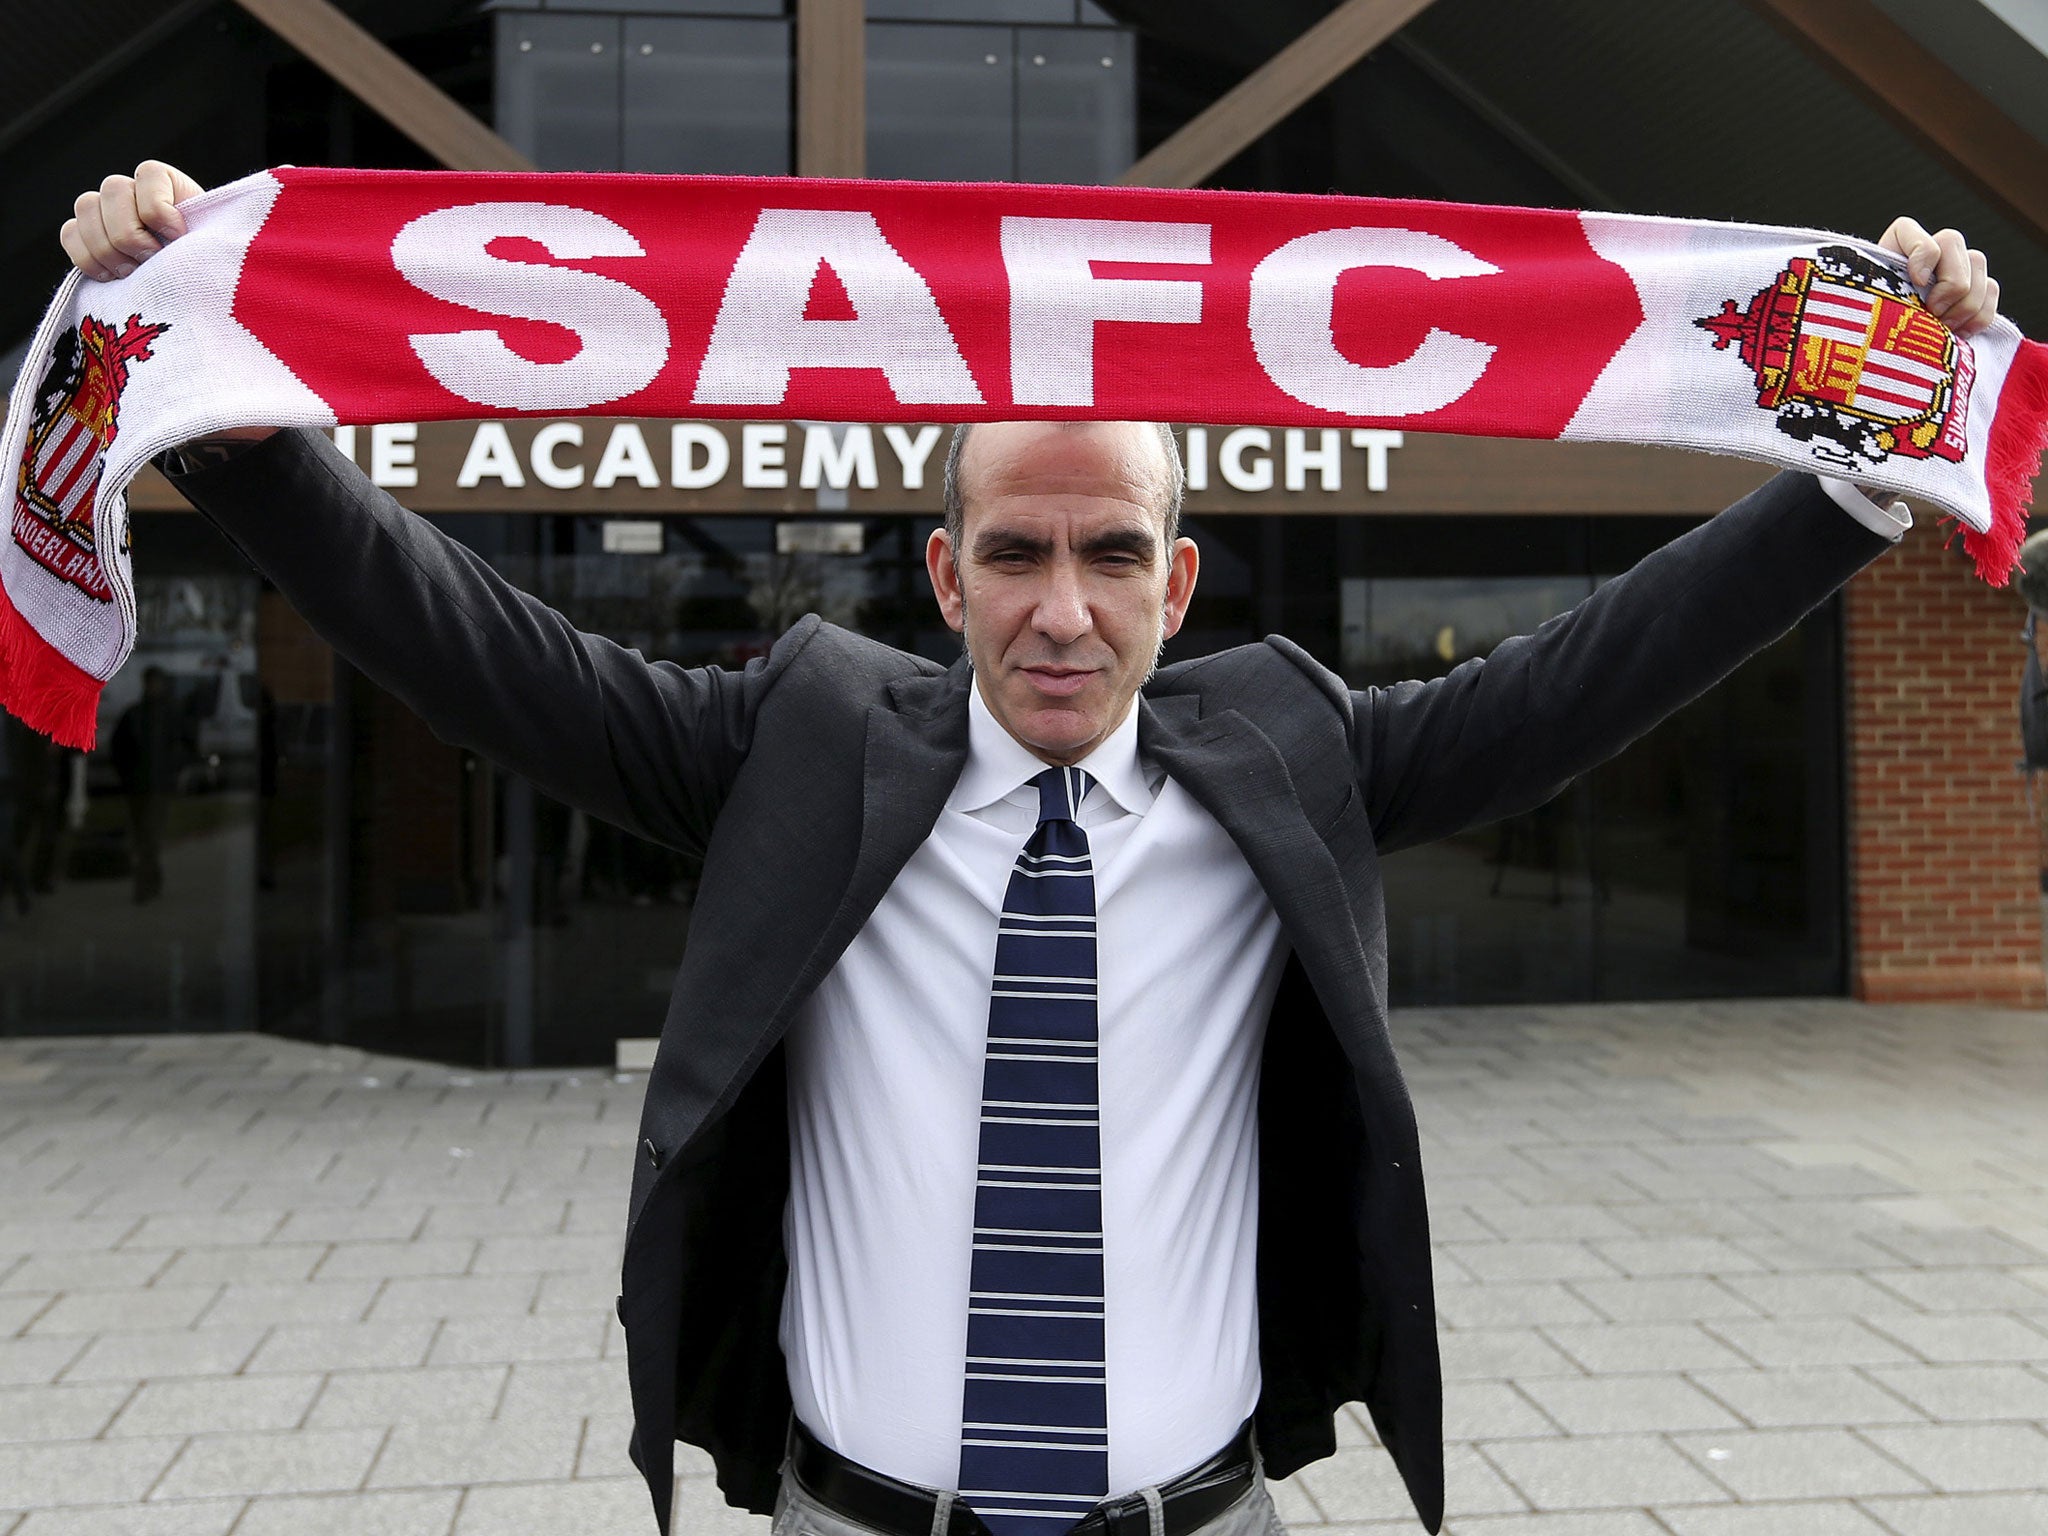 Paolo Di Canio’s arrival as Sunderland coach has led many miners to want to remove their historic banner from the club in protest